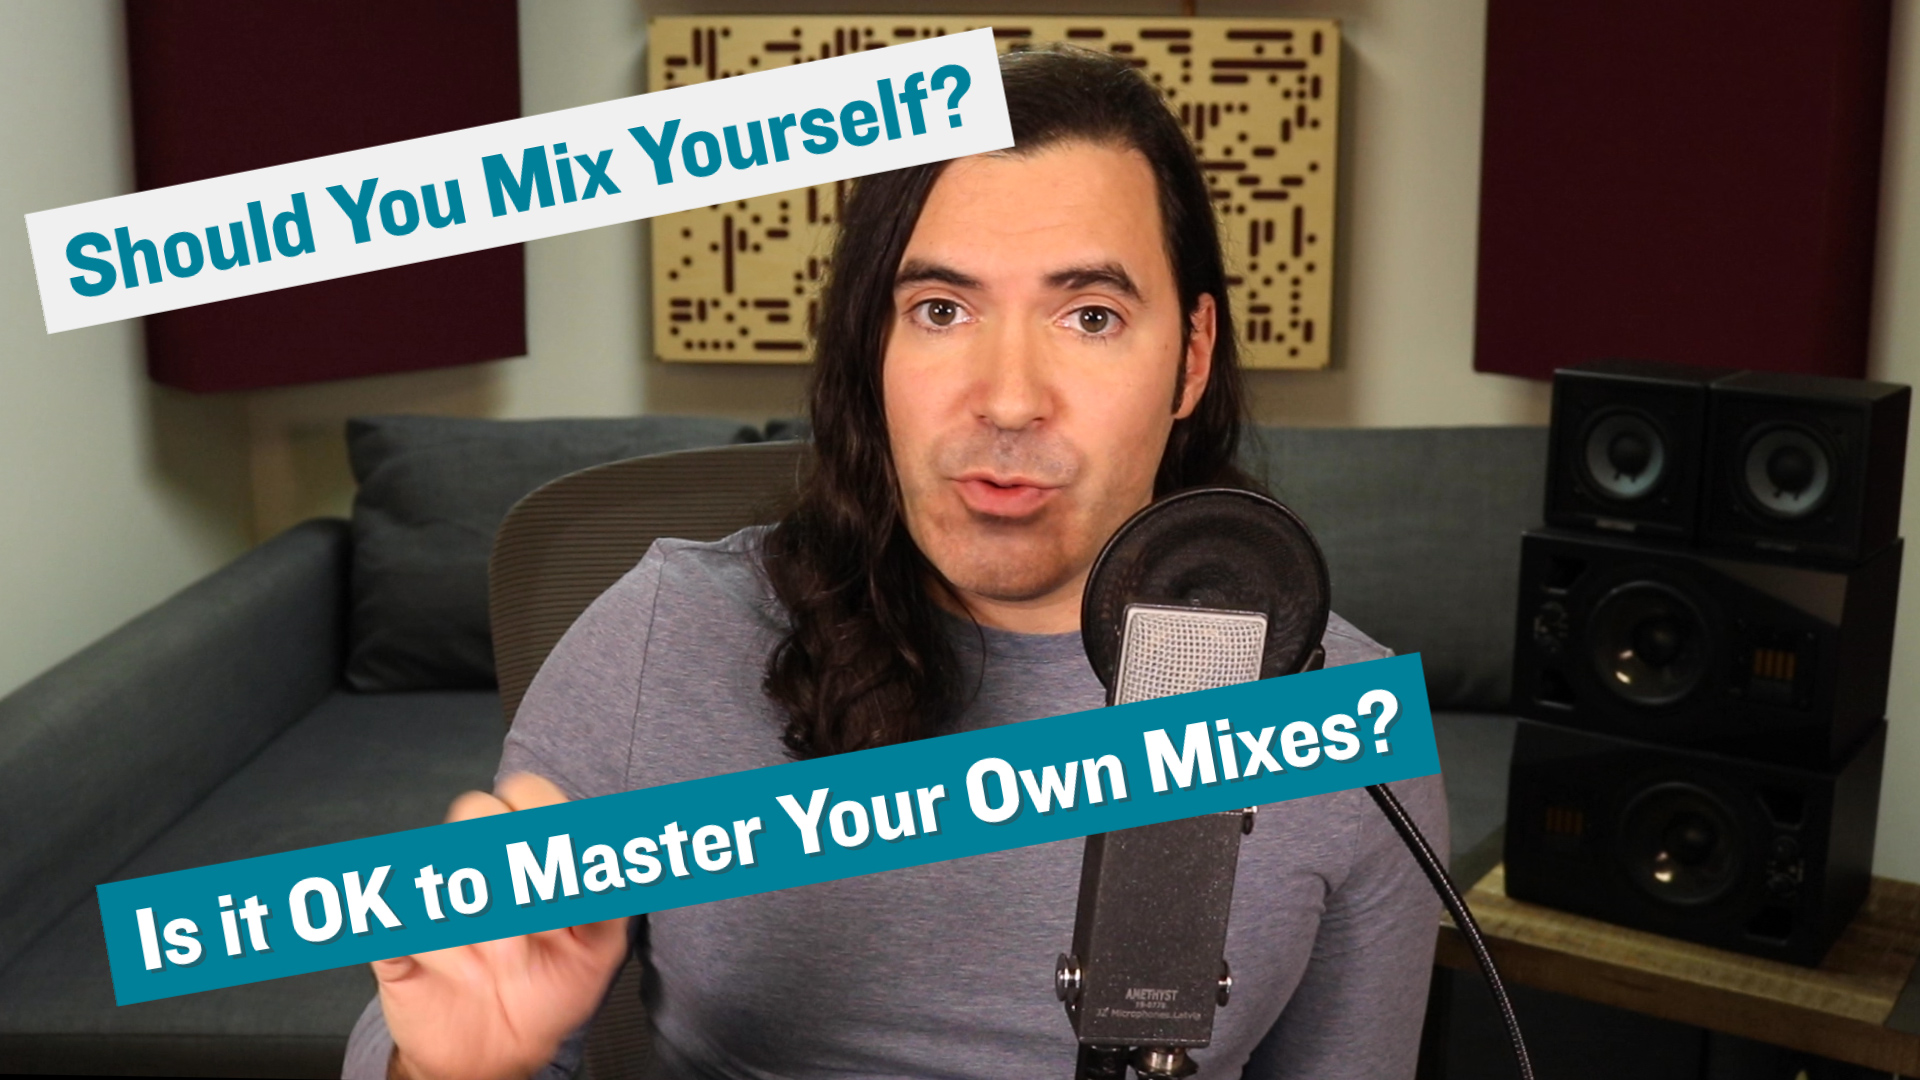 Is it OK to Mix Your Own Recordings? Or Master Your Own Mixes?